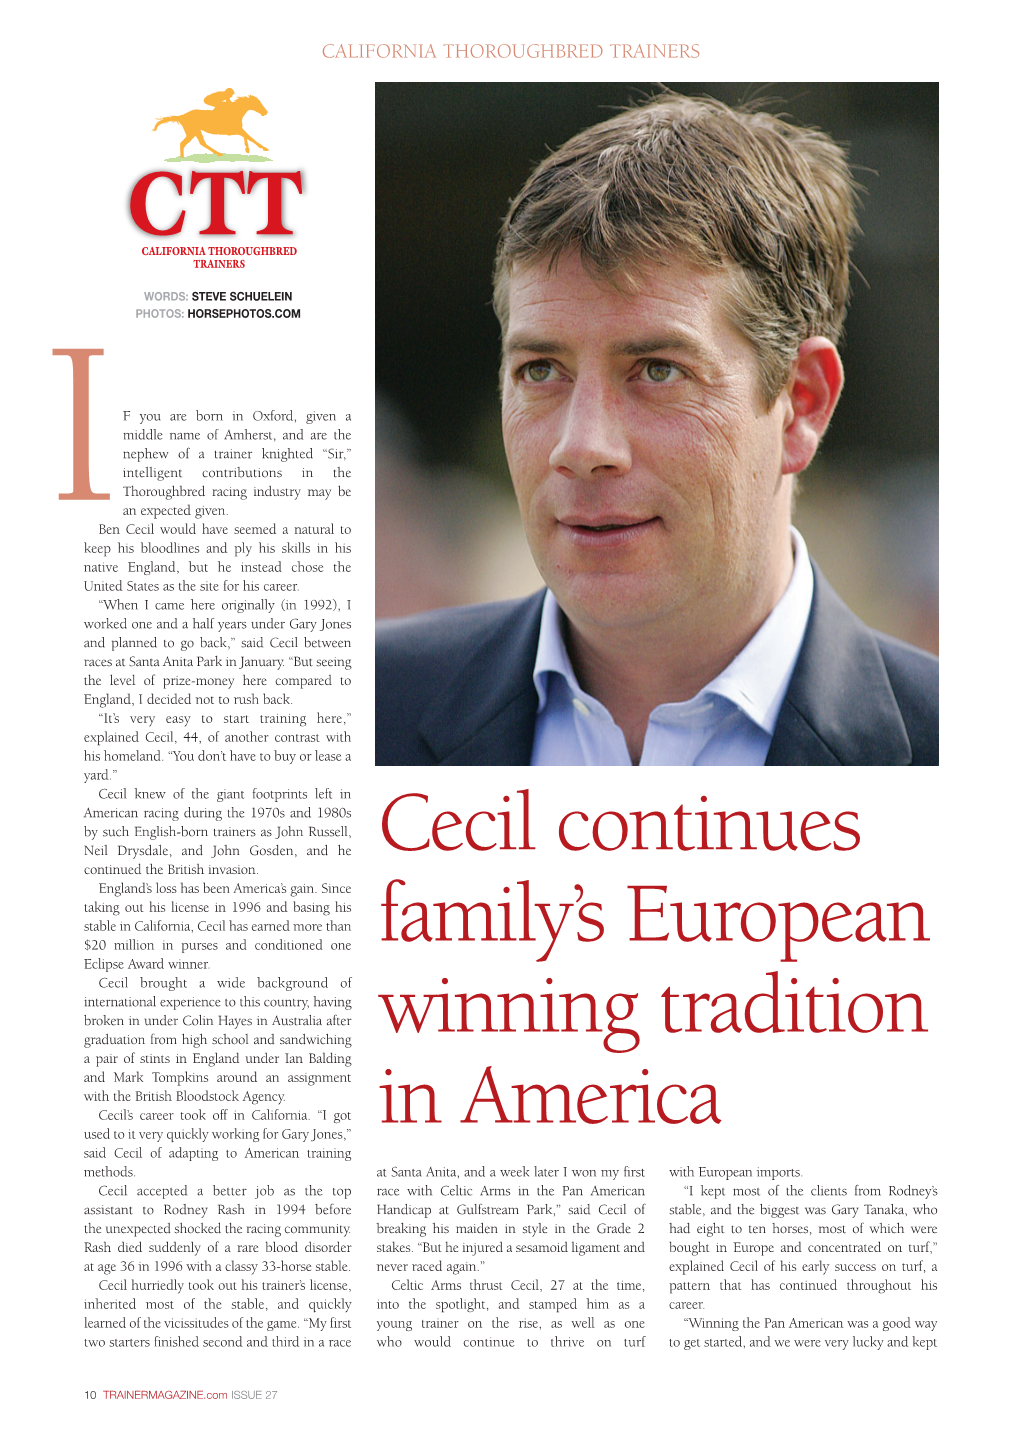 Cecil Continues Family's European Winning Tradition in America